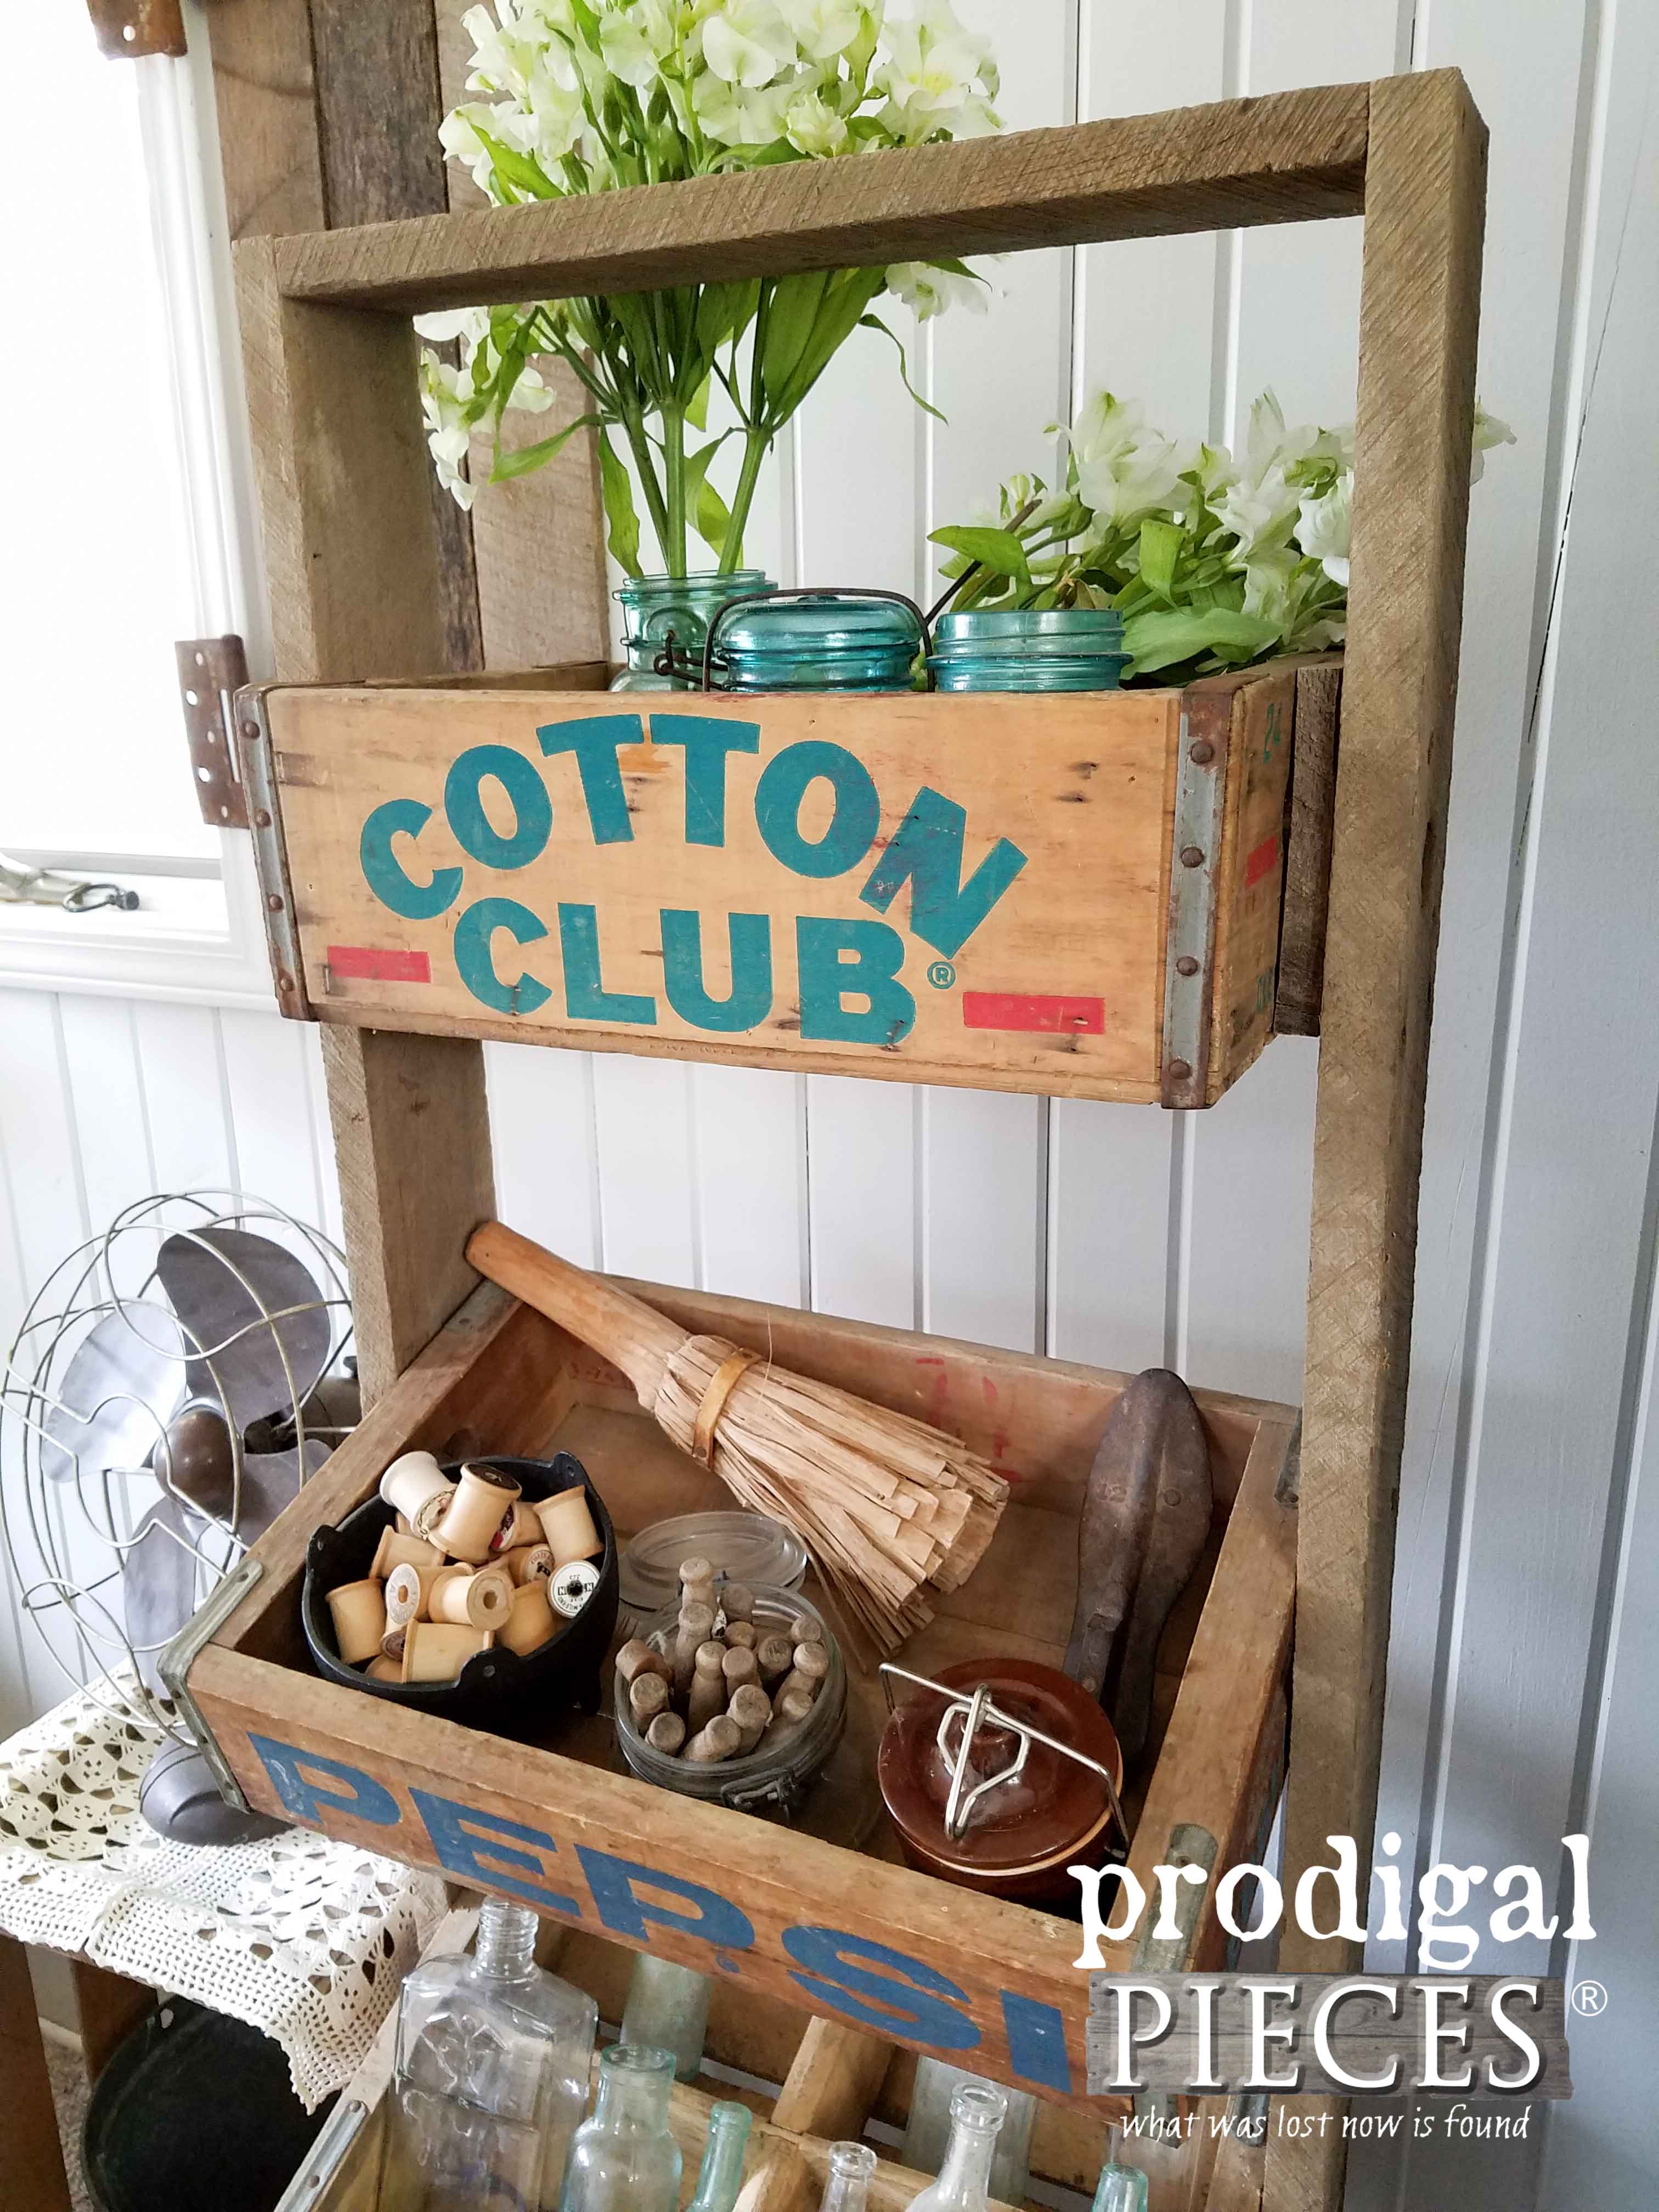 Soda Crates Make for a Rustic Flea Market Style Stand by Prodigal Pieces | www.prodigalpieces.com